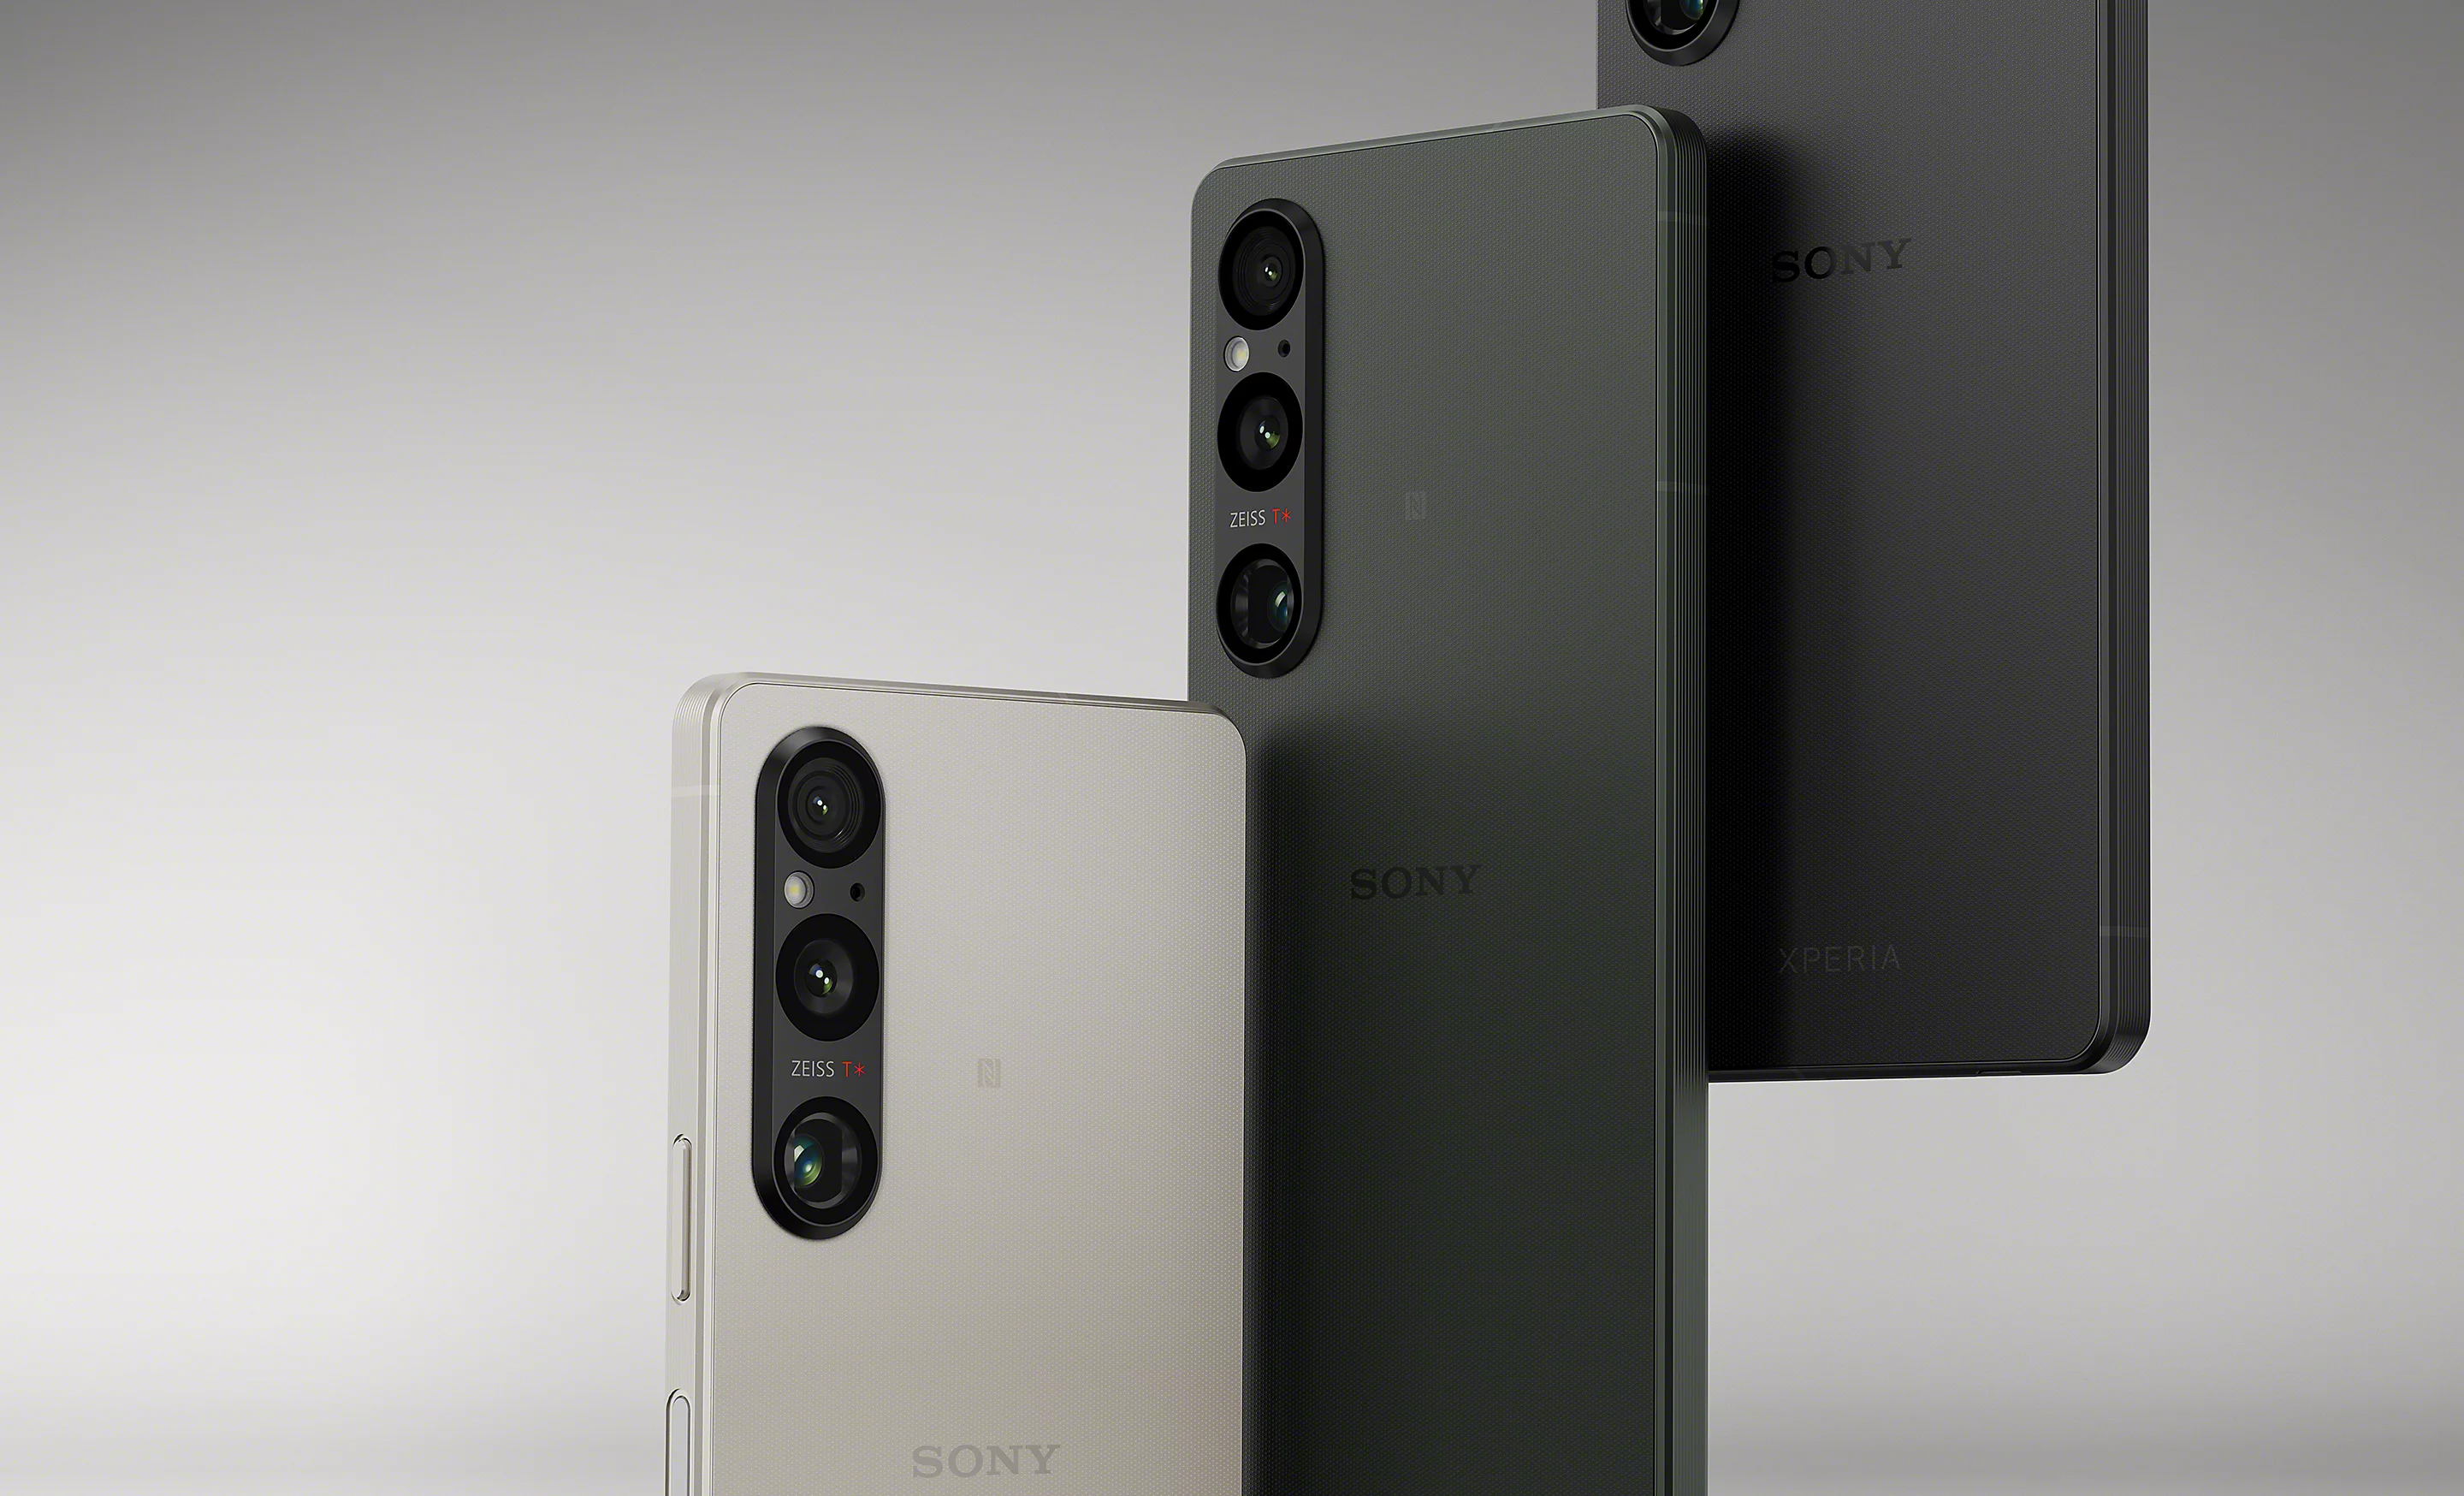 Sony Xperia 1 V in Nepal: This flagship phone offers you a new leap in mobile photography